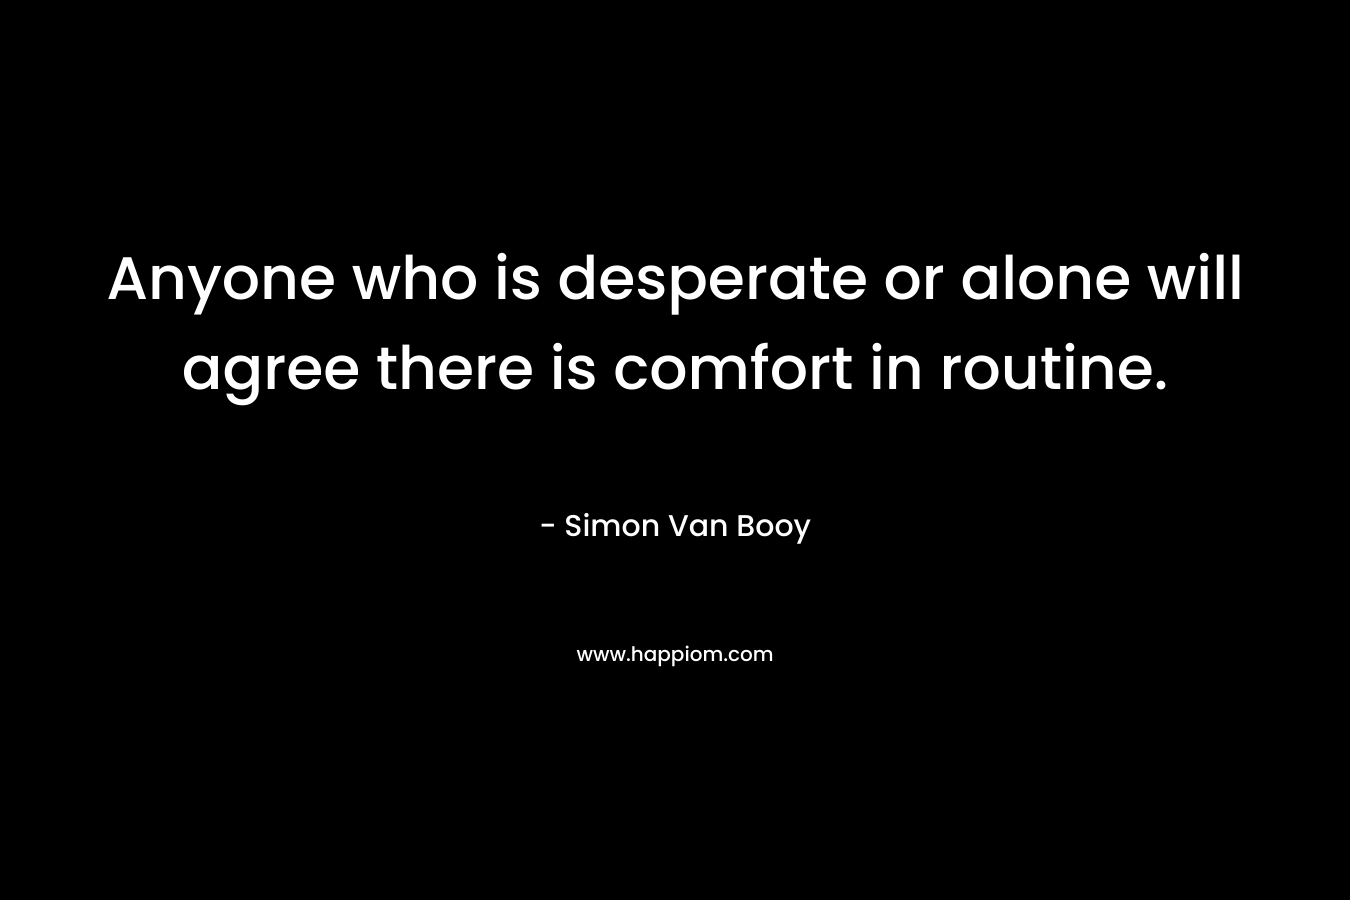 Anyone who is desperate or alone will agree there is comfort in routine.